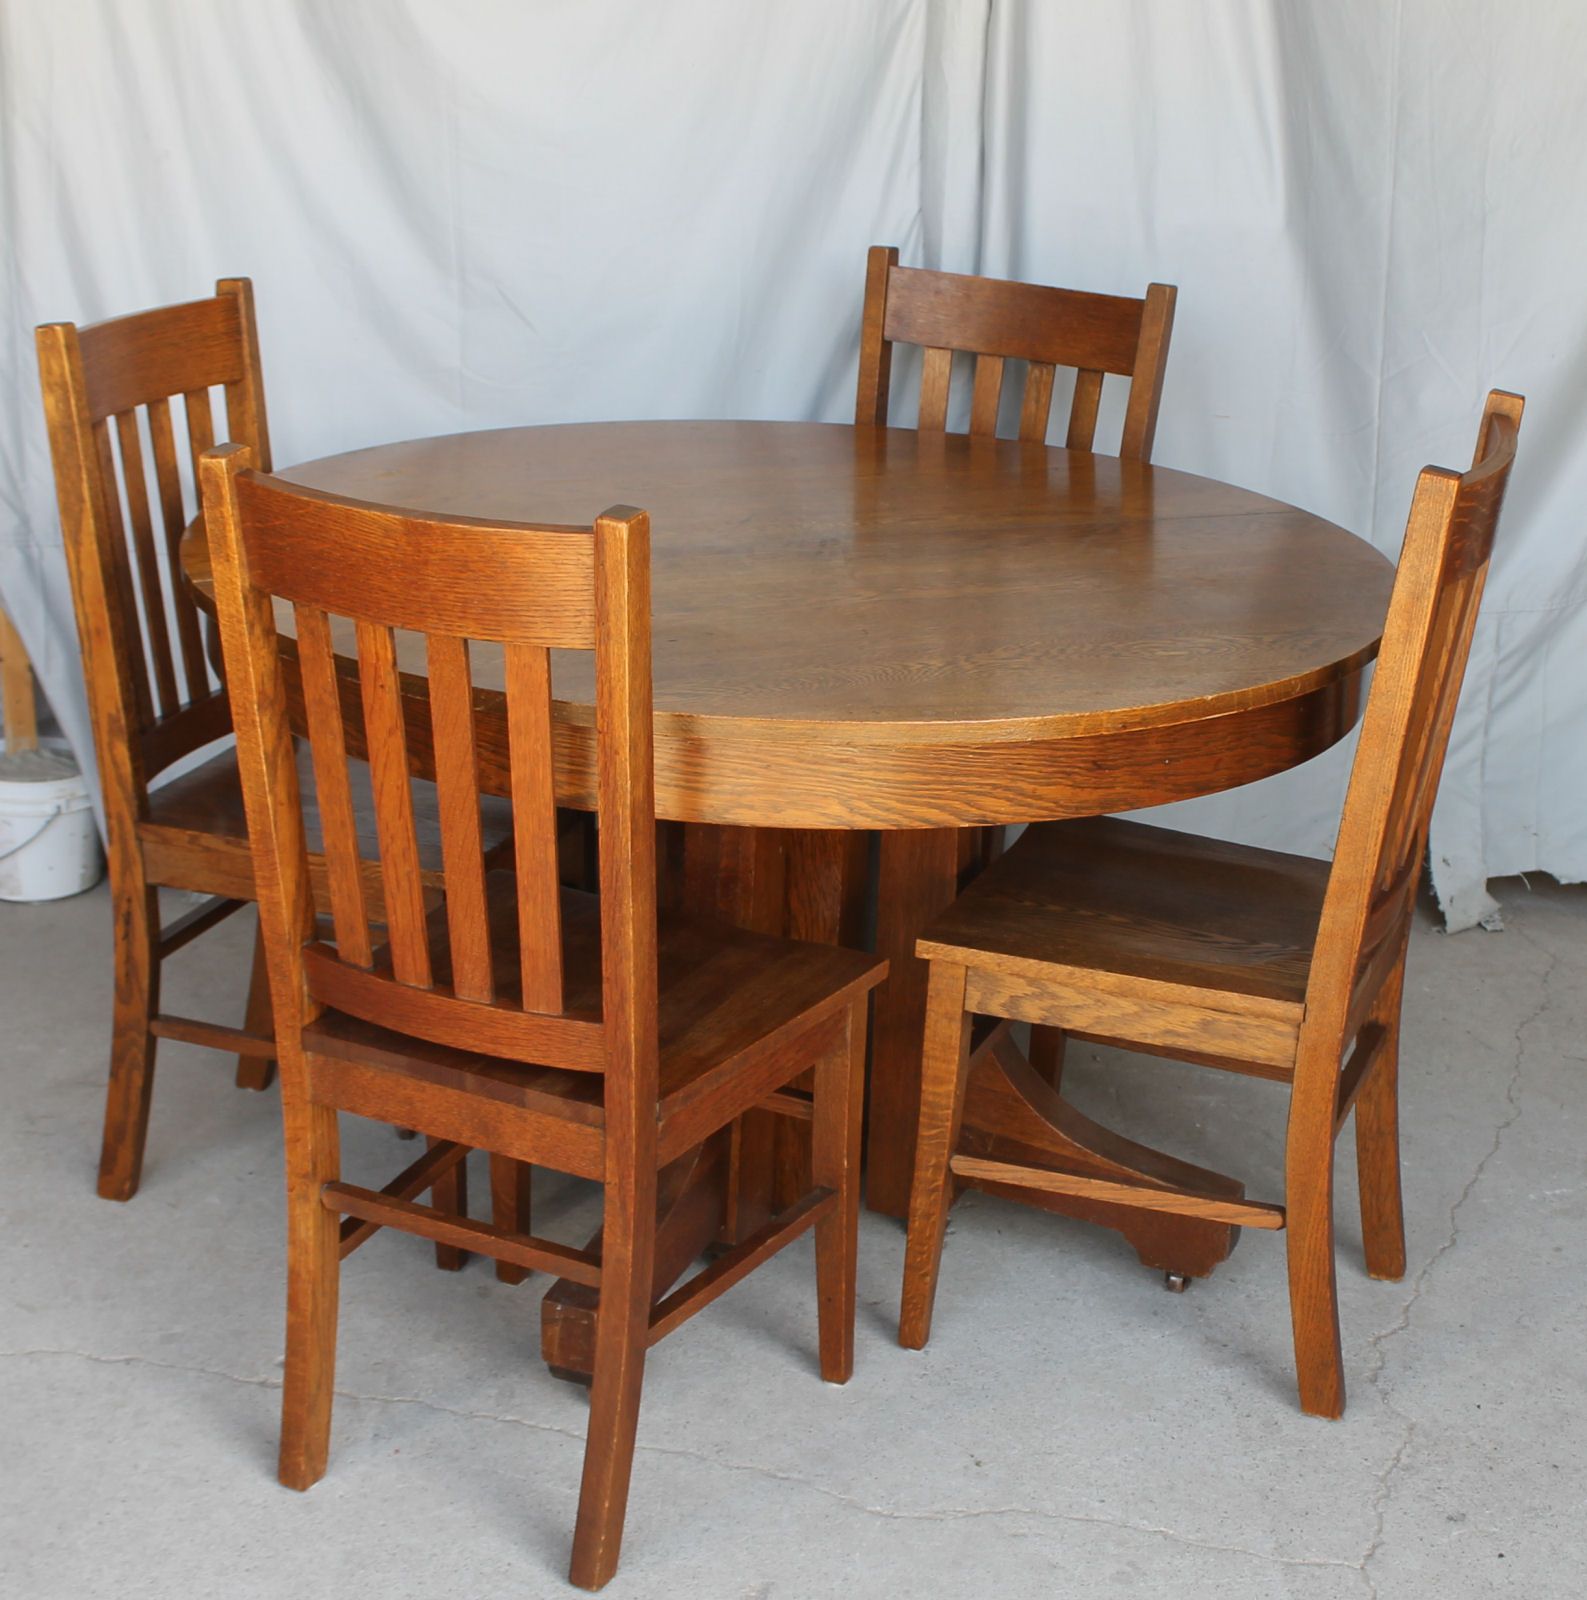 Bargain John'S Antiques | Antique Mission Style Round Oak Regarding Newest Vintage Brown Round Dining Tables (View 4 of 15)